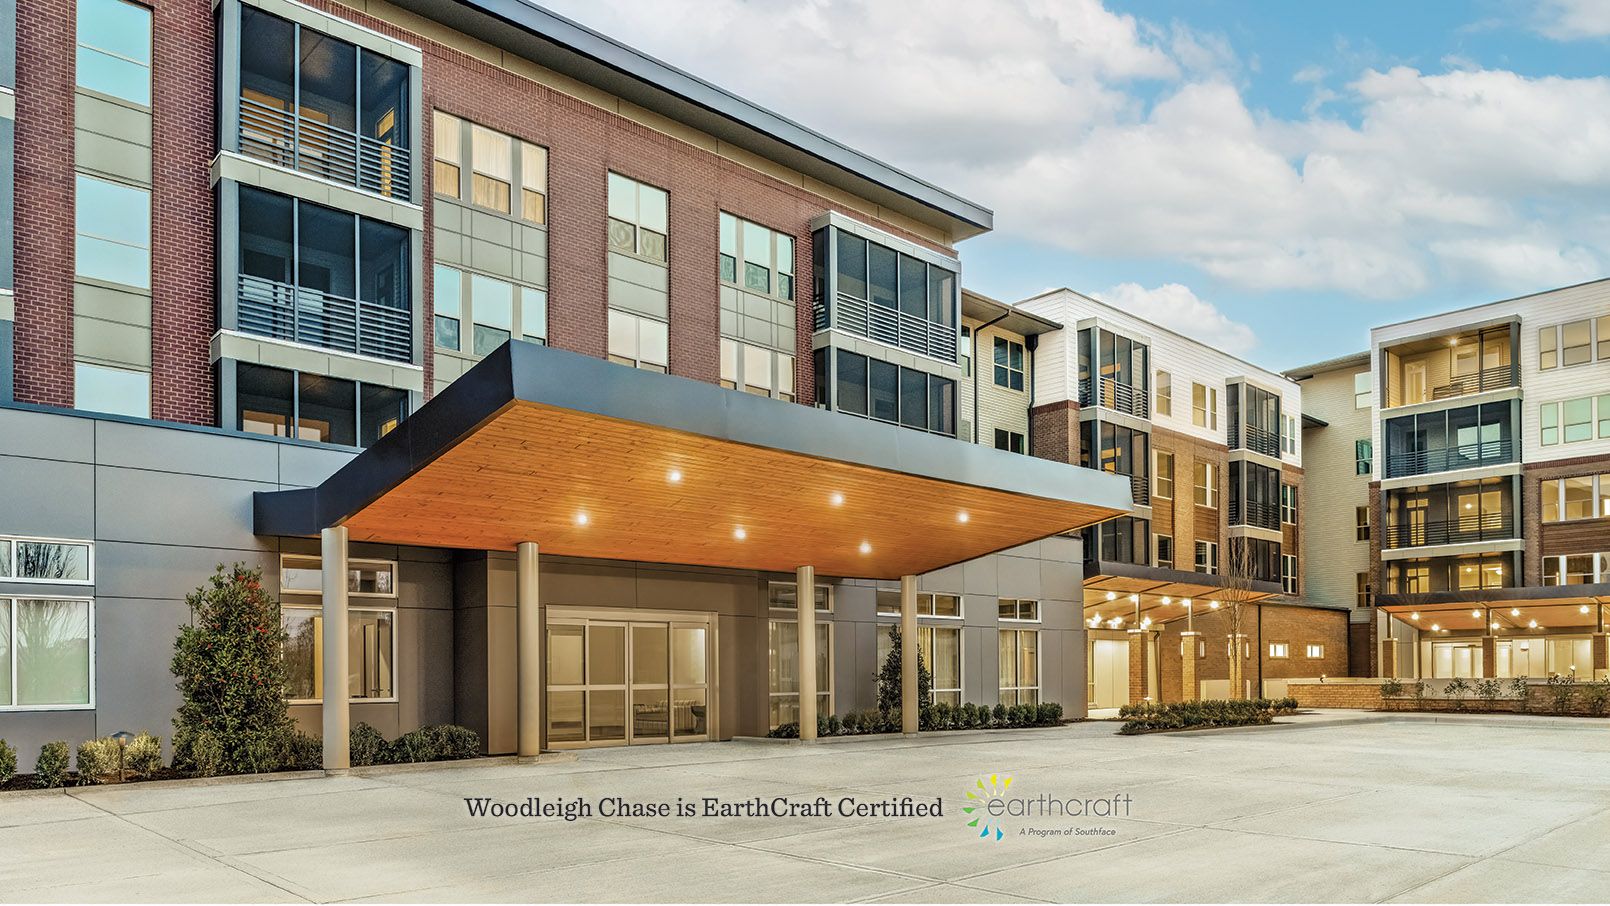 Woodleigh Chase is EarthCraft Certified